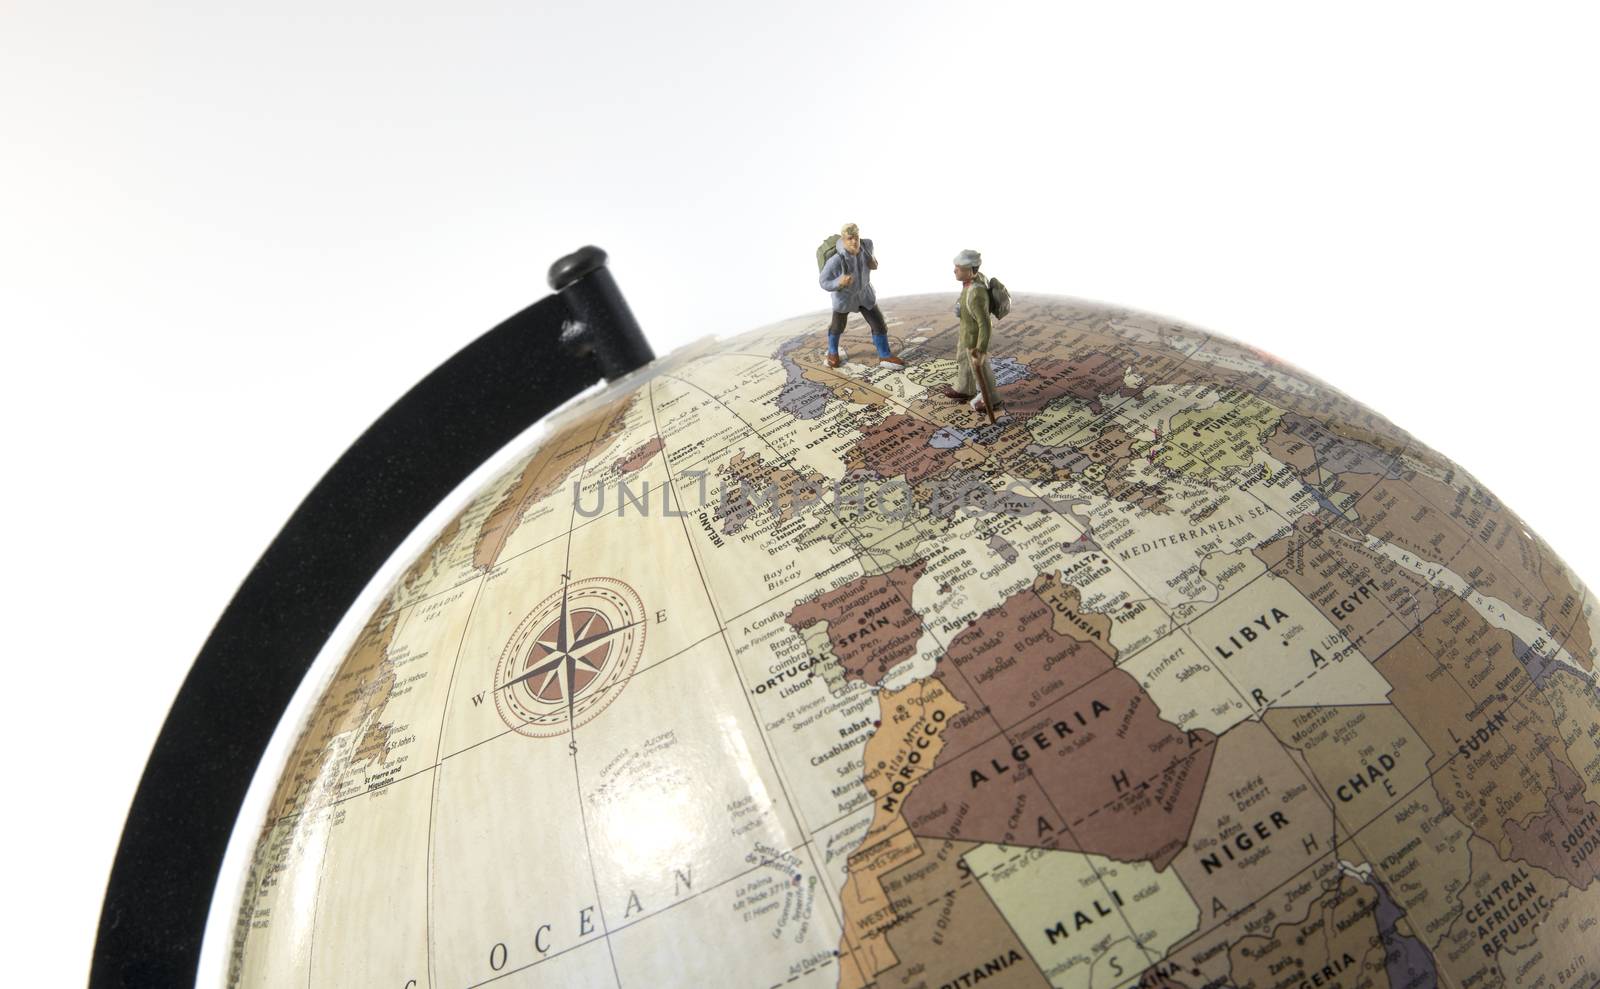 little figures backpaking europea as a big adventure with backpack and walking on a globe